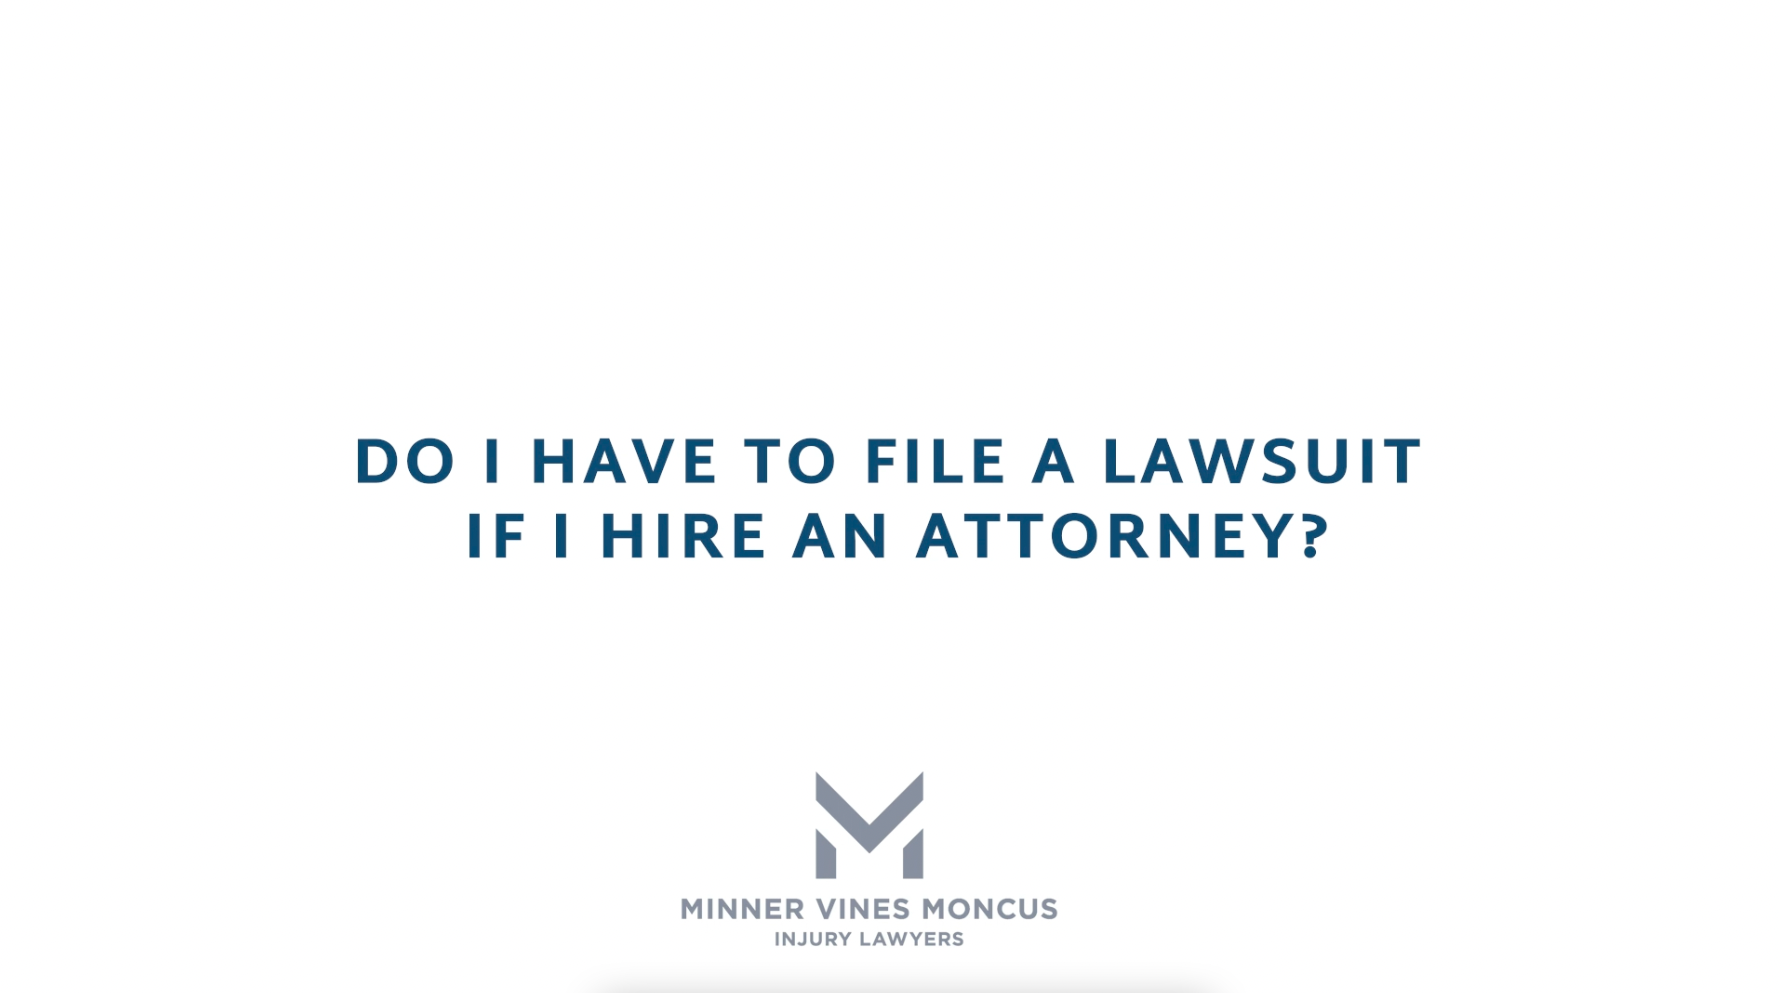 Do I have to file a lawsuit if I hire an attorney?